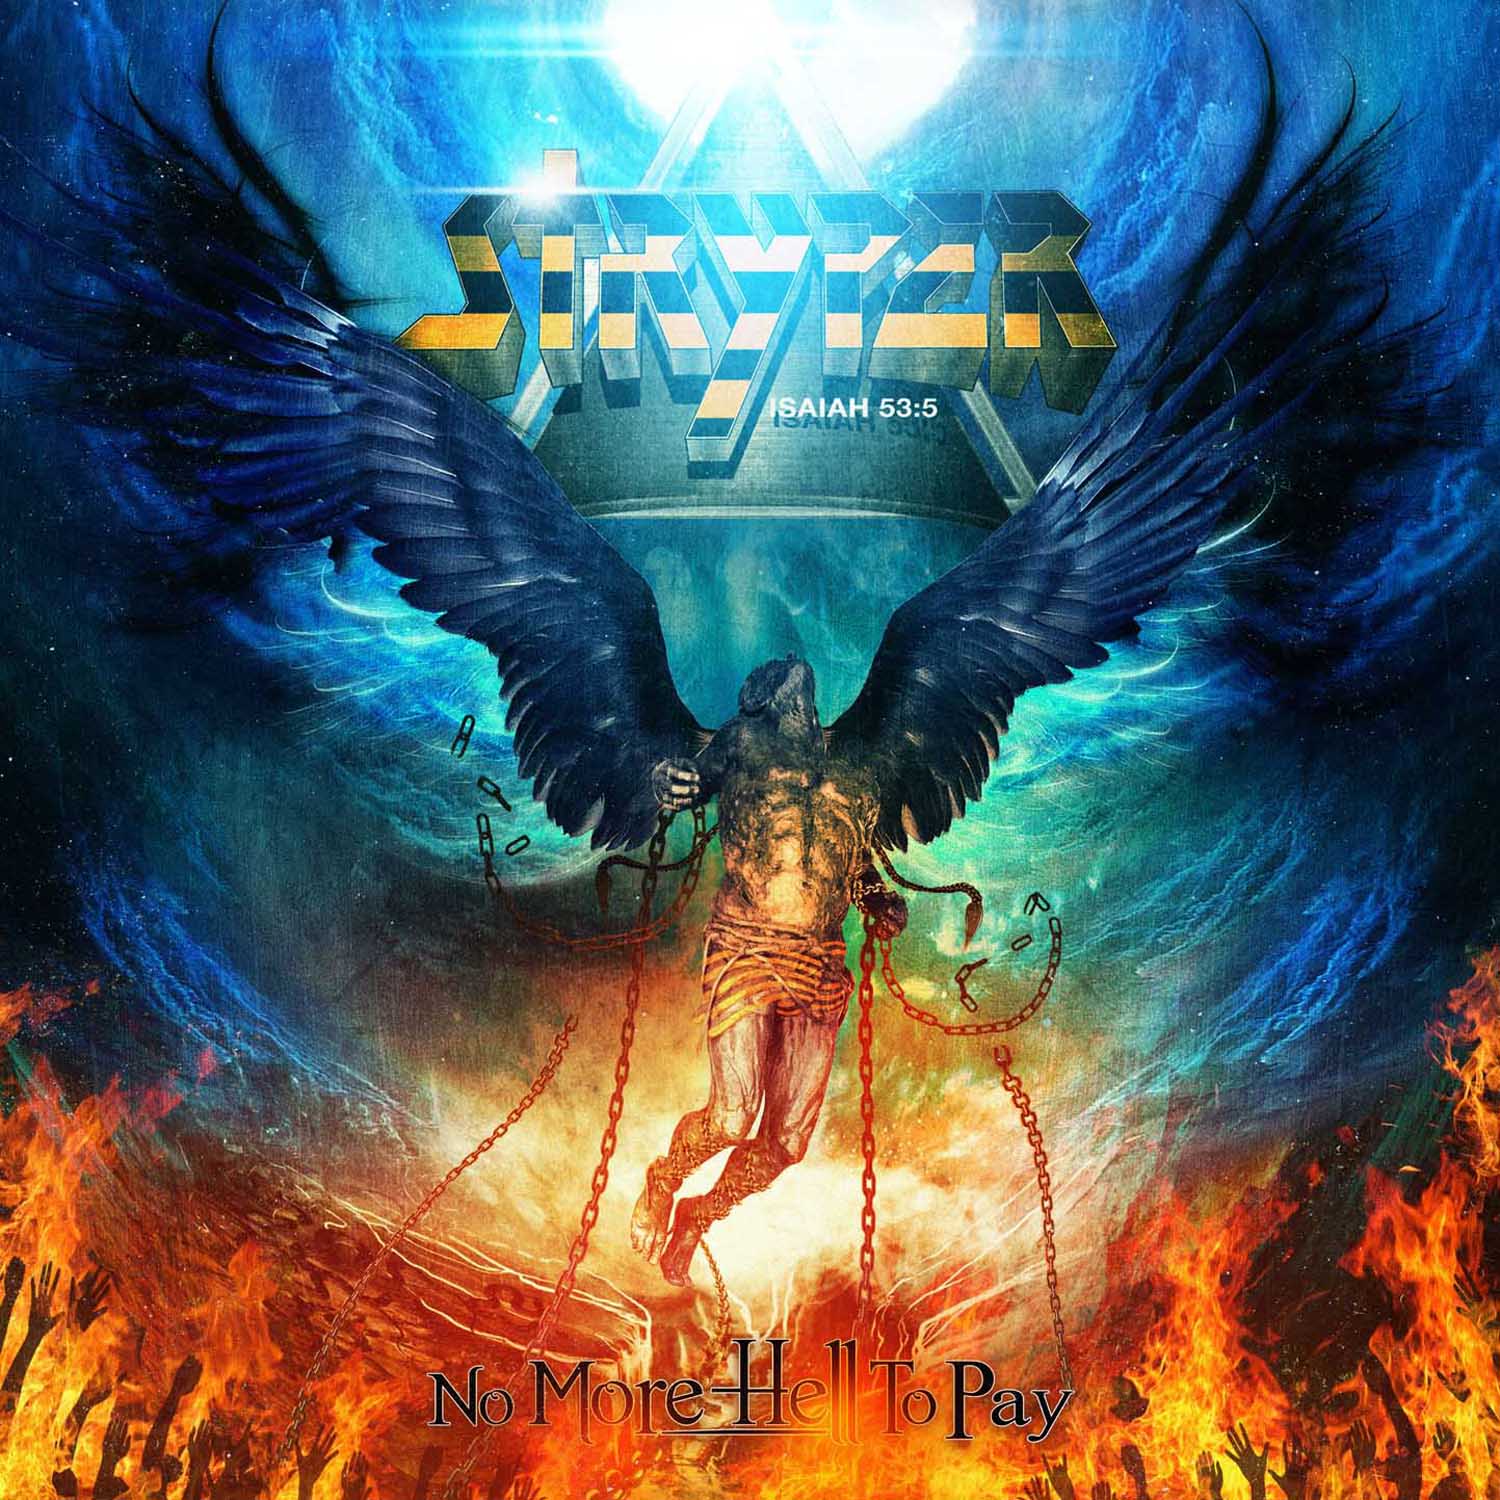 stryper-no-more-hell-to-pay